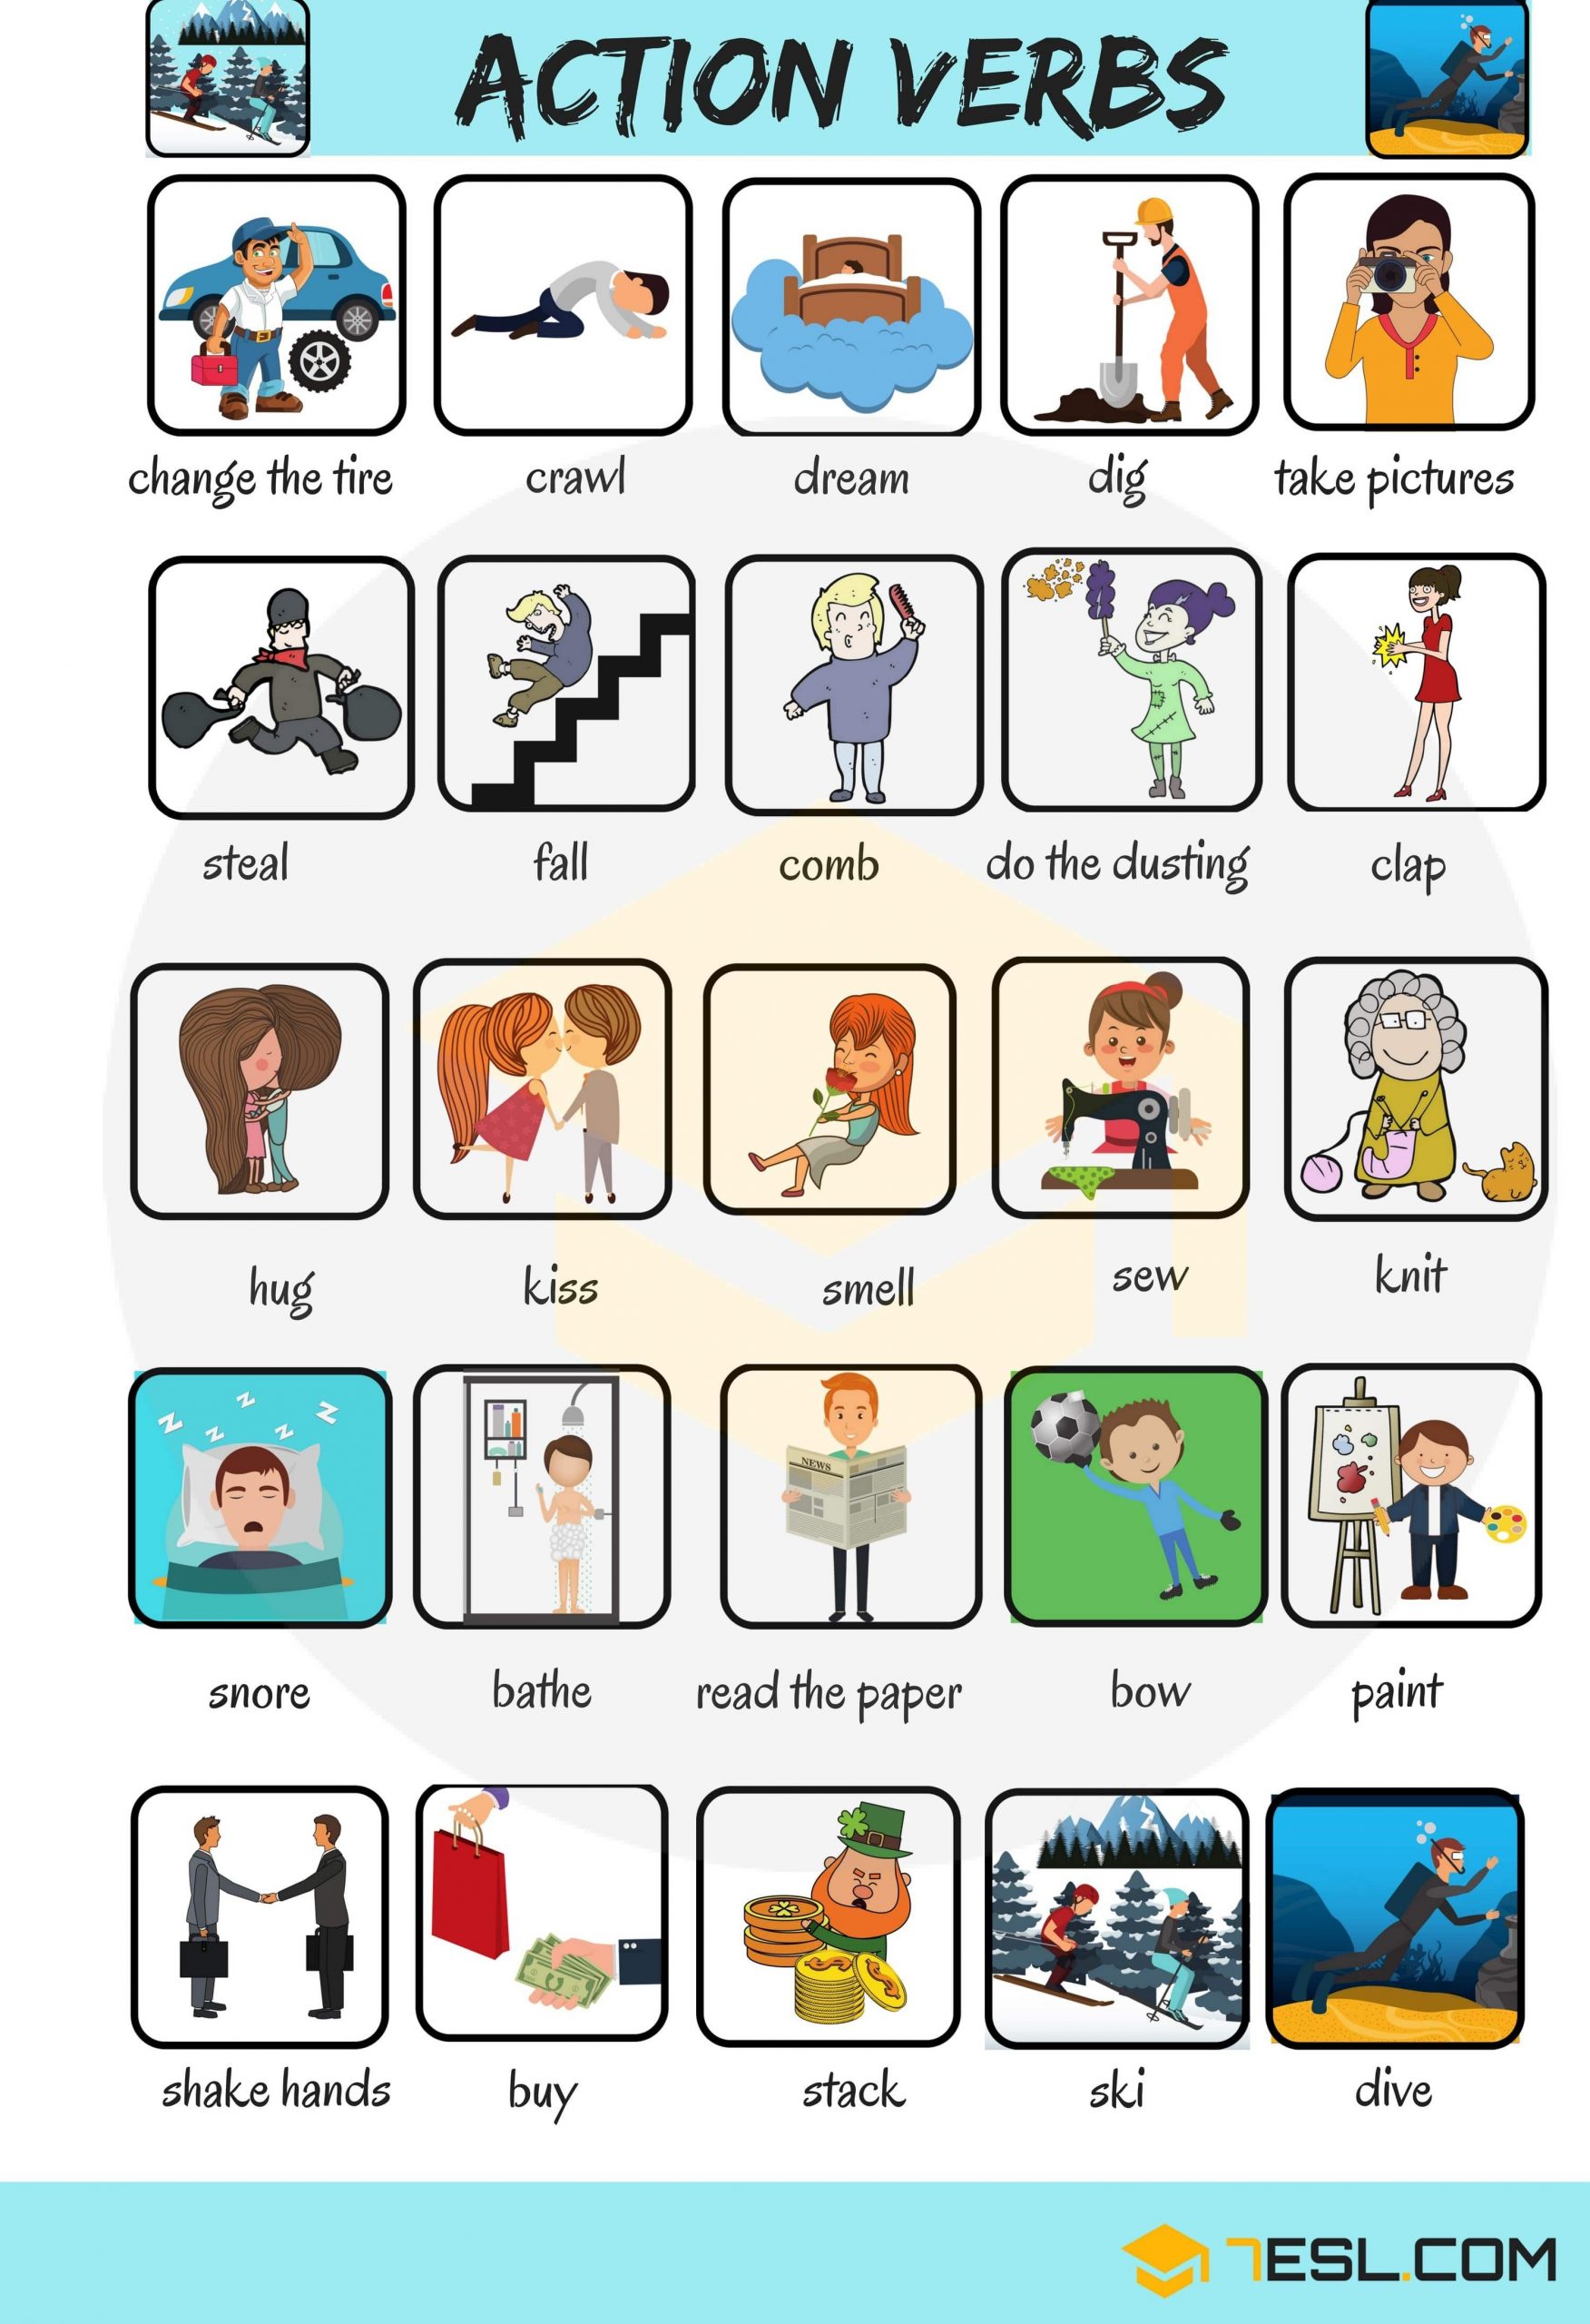 Action Verbs: List Of 50 Common Action Verbs With Pictures dedans Loto Des Verbes D&amp;amp;#039;Action 